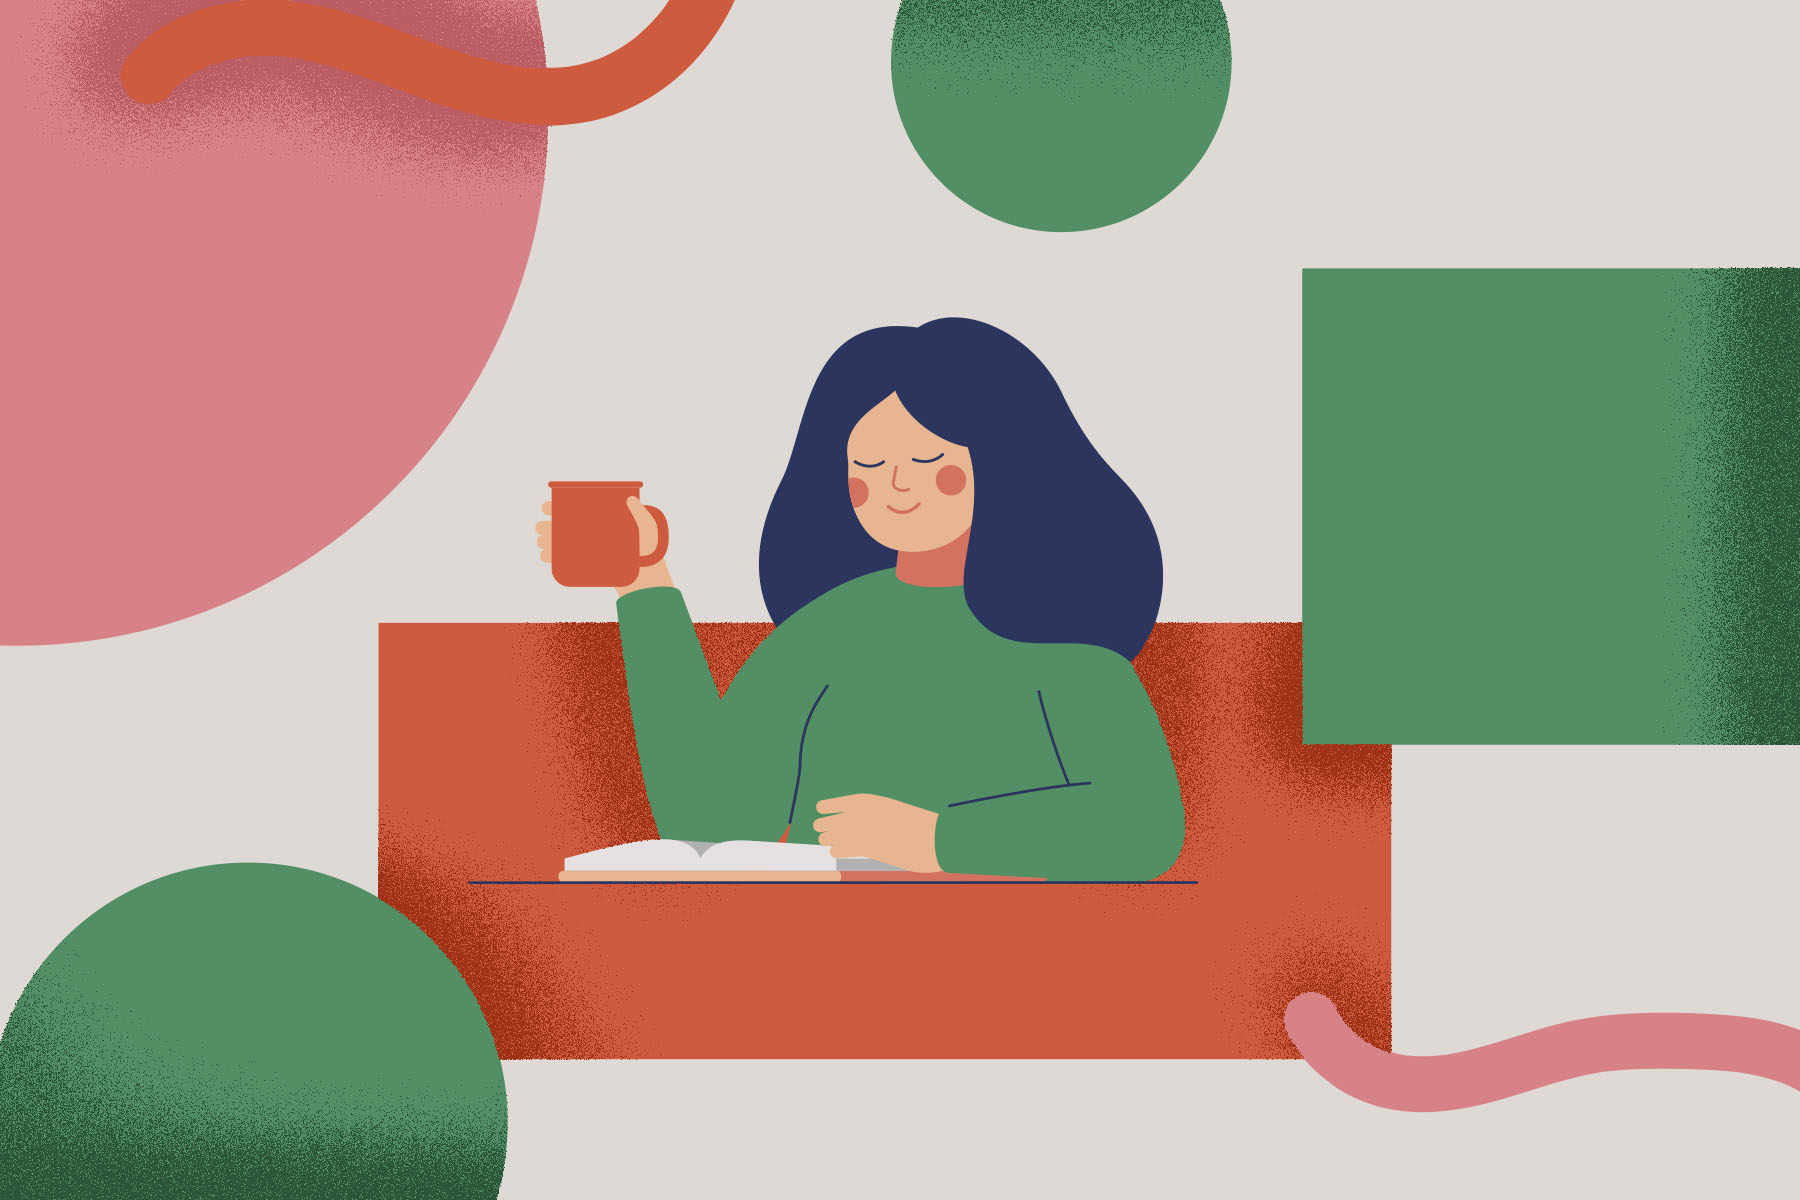 An illustration of a woman sitting with a mug and a book